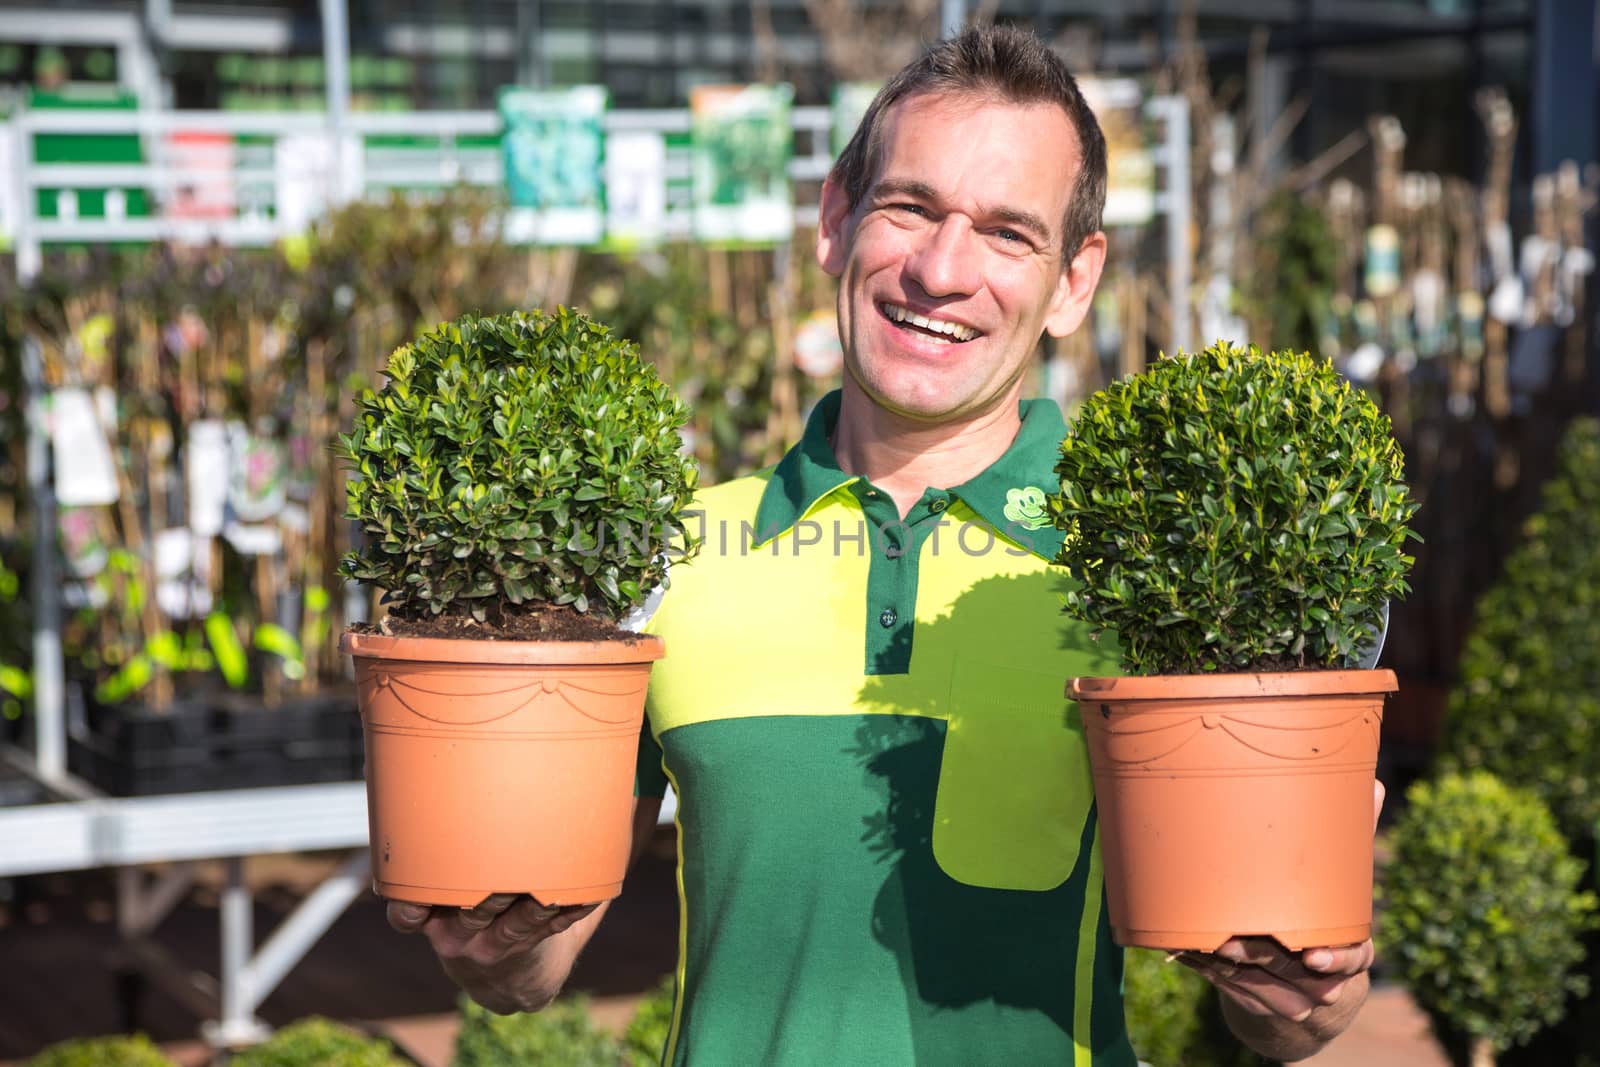 Gardener or employee at garden center posing with two boxtrees